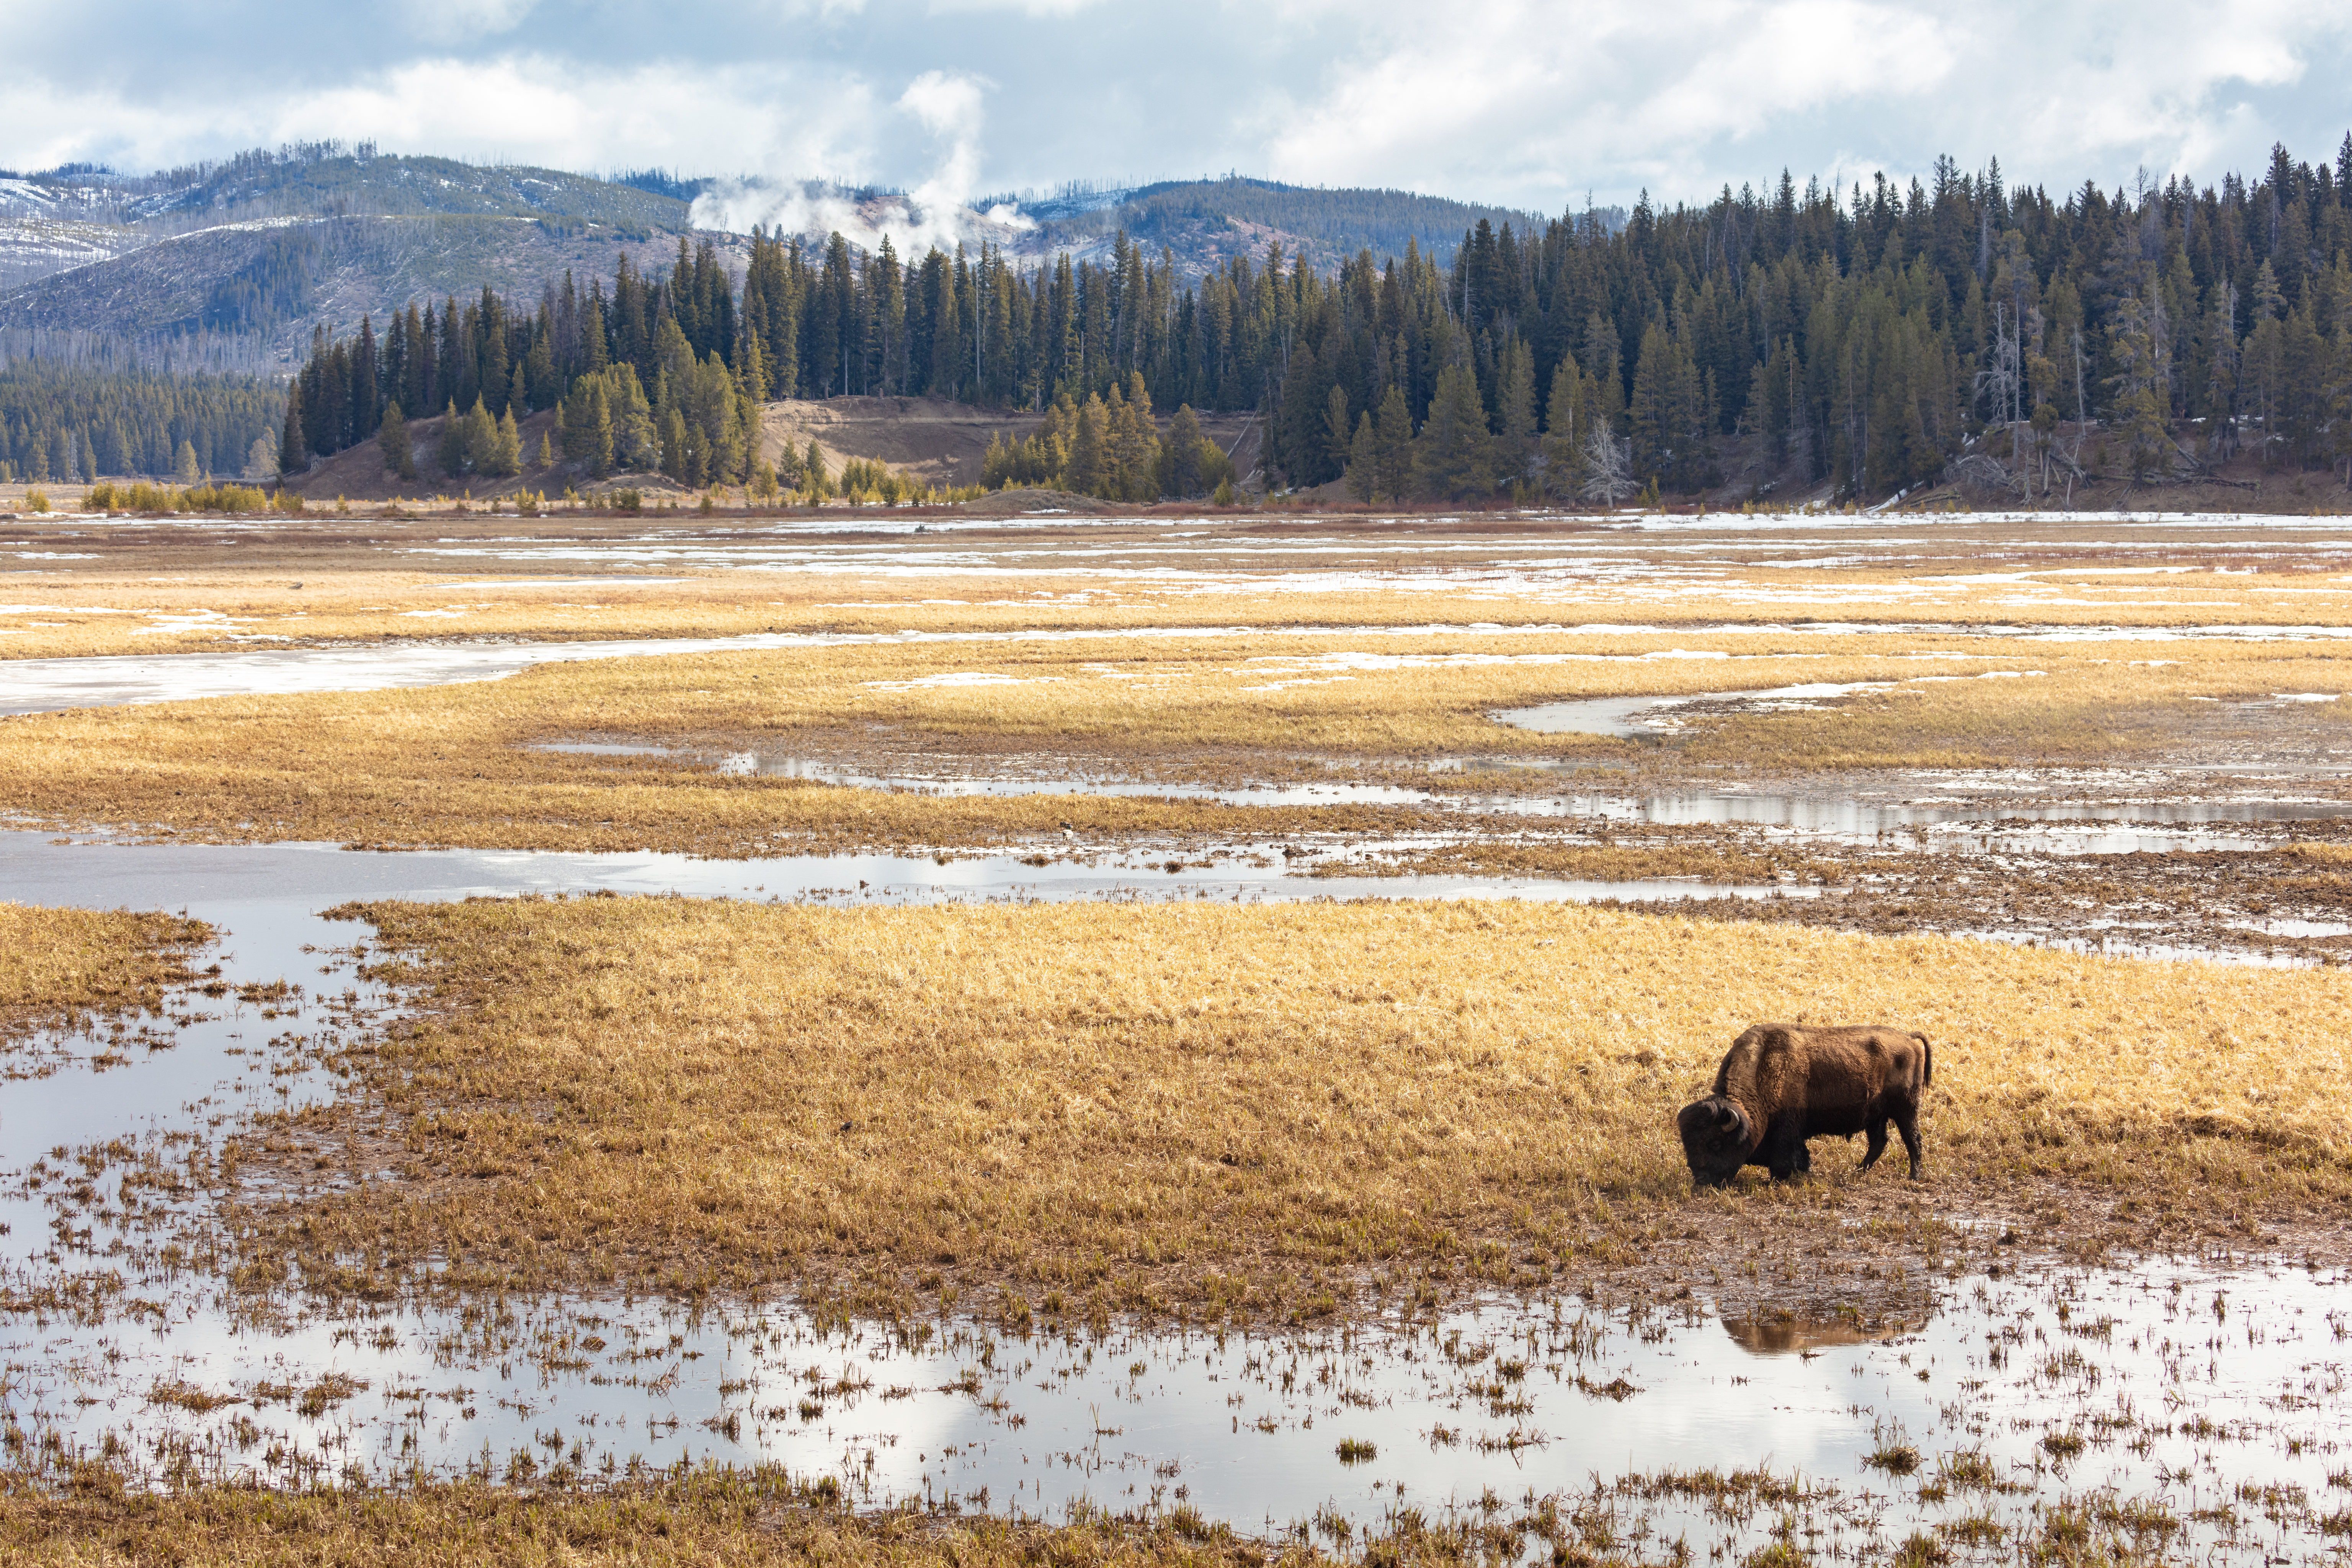 a bison grazing in a marshy area